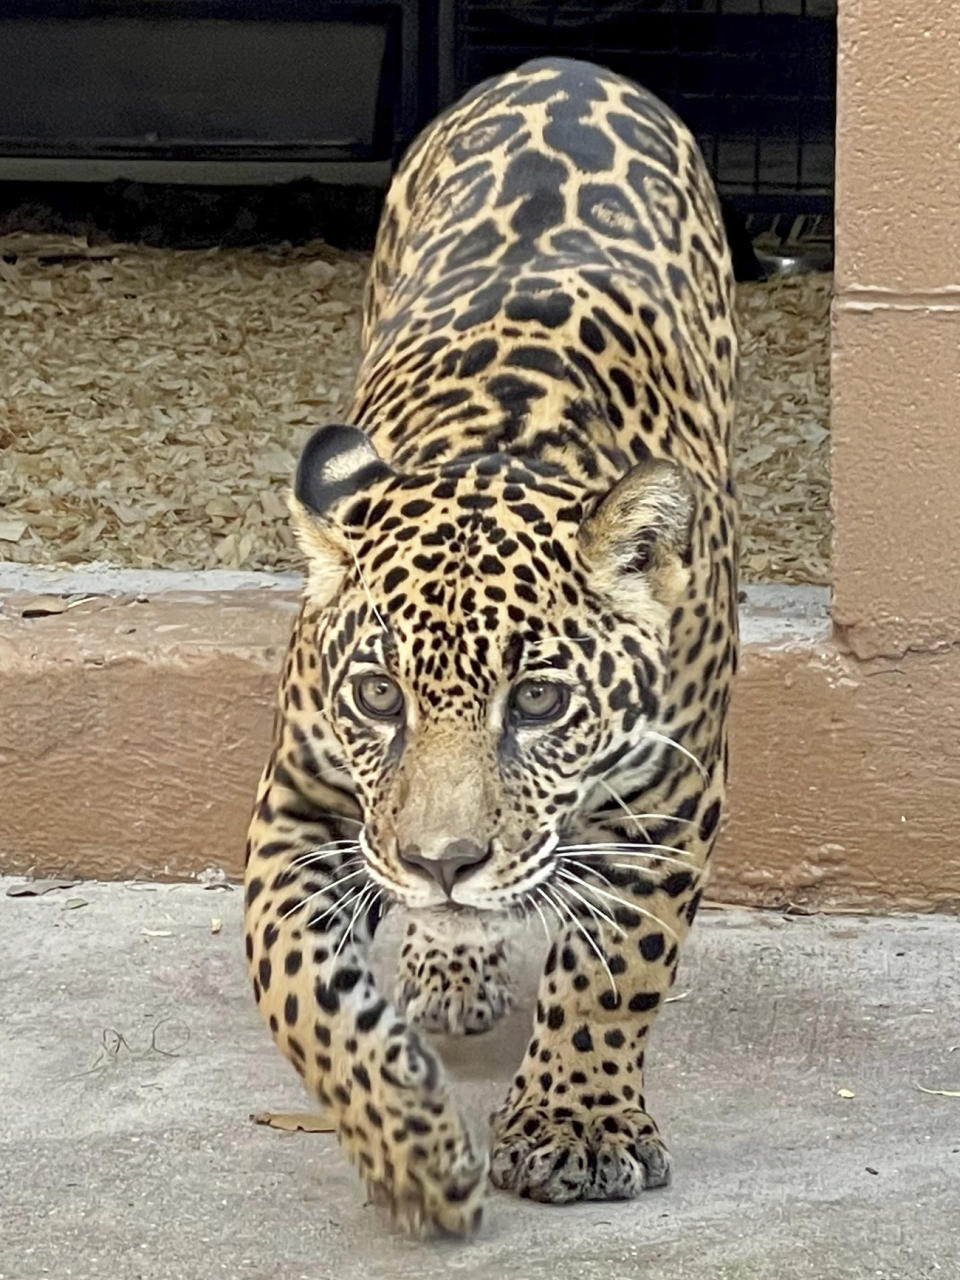 This image provided by the Audubon Zoo shows a seven-month-old female jaguar in New Orleans, Nov. 17, 2021. The New Orleans Audubon Zoo has taken in the jaguar that was rescued from wildlife trafficking. The jaguar was rescued by the U.S. Fish and Wildlife Service and the Association of Zoos and Aquariums contacted the zoo to care for it because it already has the experience and equipment to house jaguars. The zoo received the jaguar on Oct. 14. (Audubon Zoo via AP)